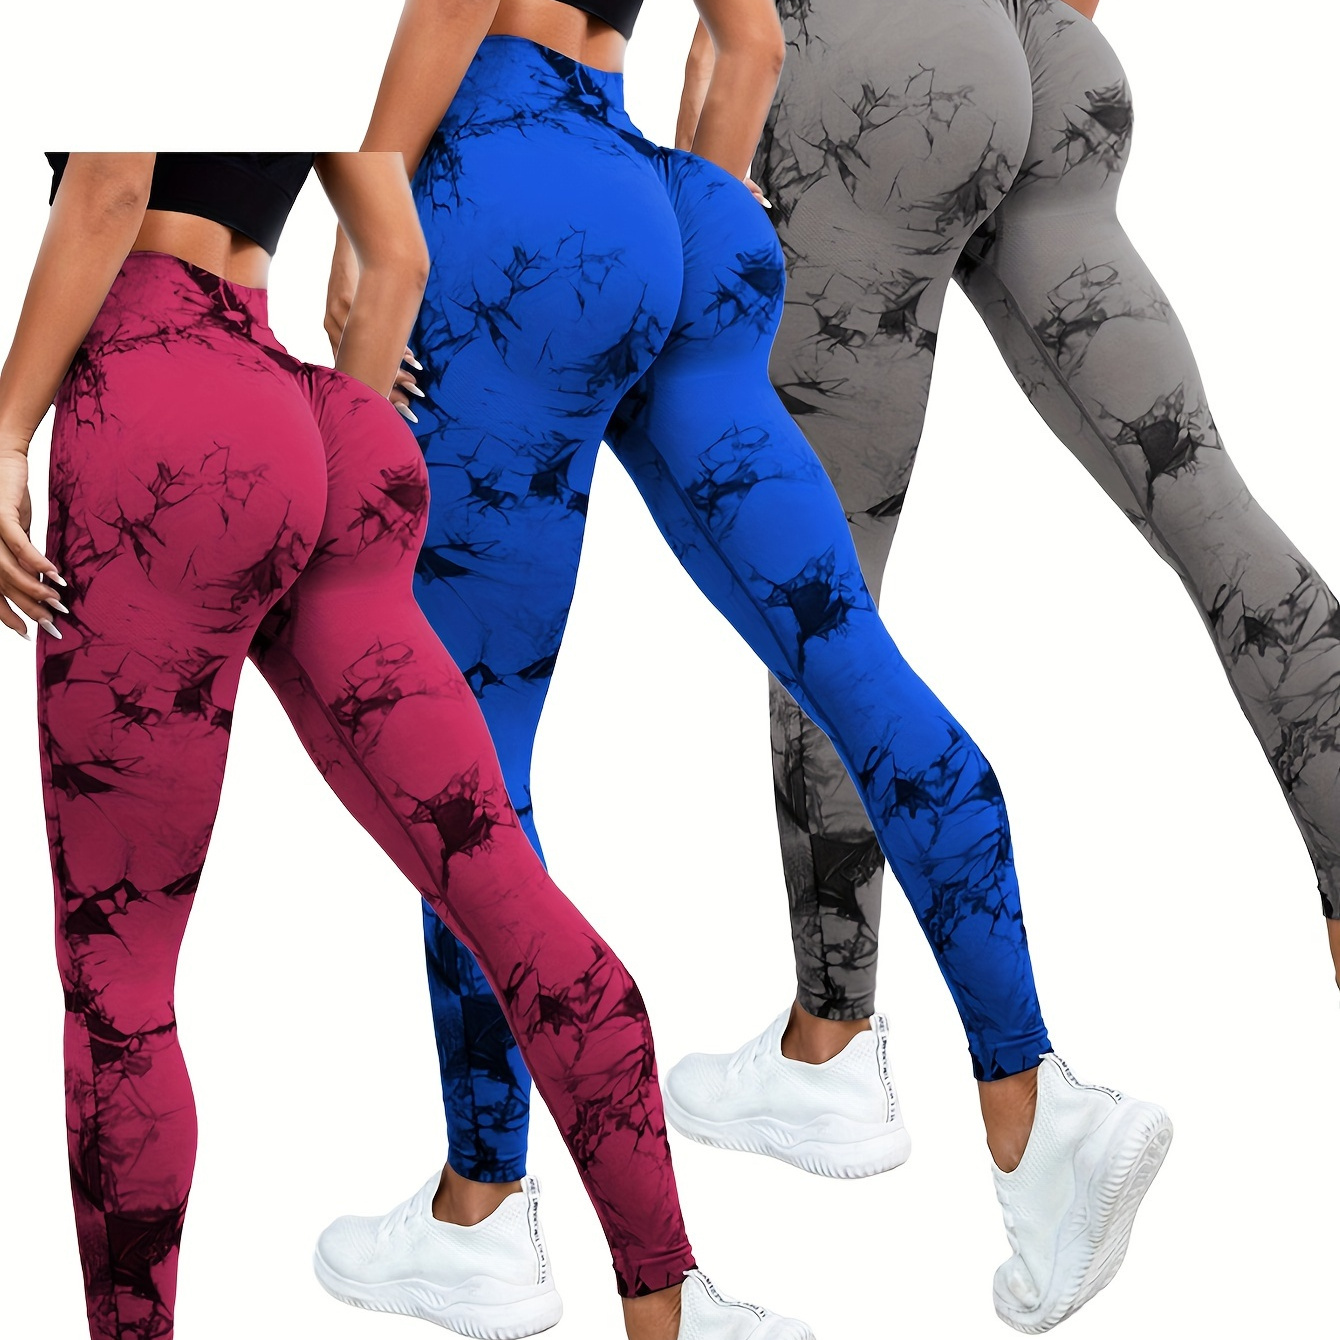 

3-pack Tie-dye Seamless Yoga Running Leggings, High-waisted Sport Long Pants For Women, Athletic Activewear Tights, Assorted Colors - For Fall & Winter